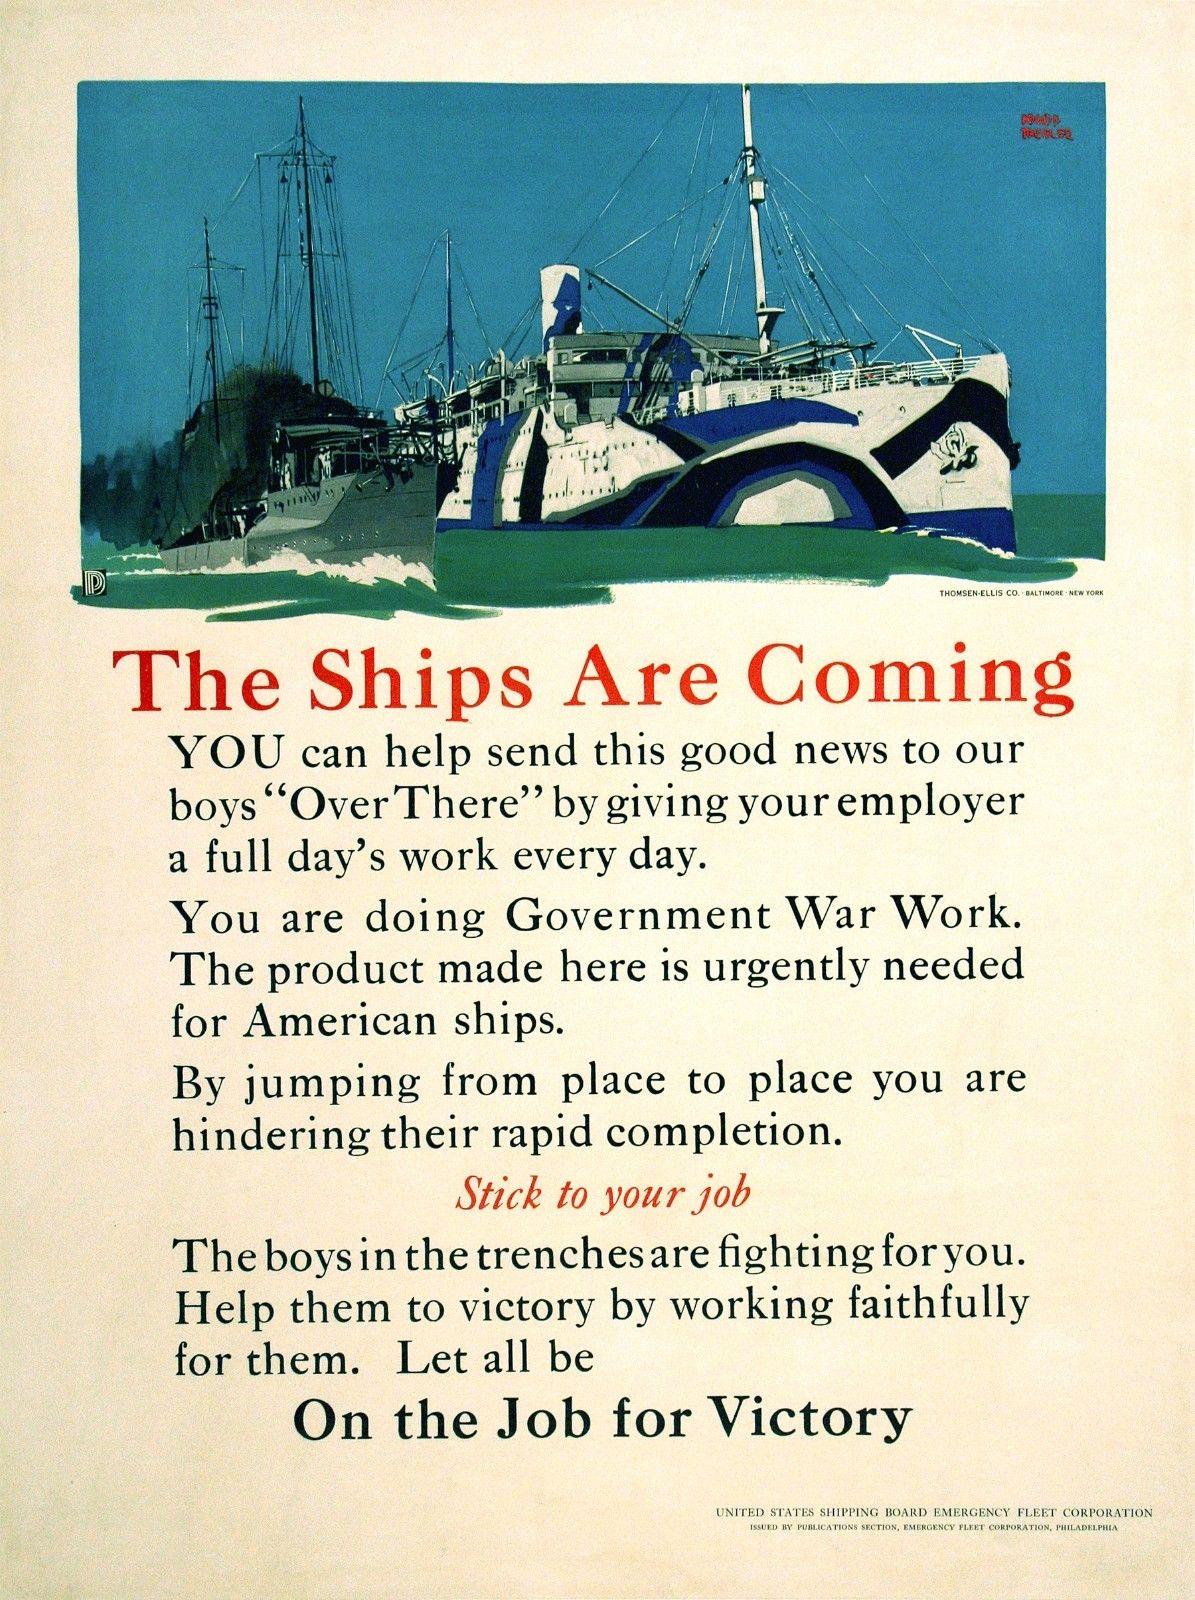 Original World War 1 military poster. The Ships are Coming On the job for Victory. This image was also used for the "Shoot ships to Germany" with a different text on it. <br>THE SHIPS ARE COMING - Artist: Adolf Treidler.